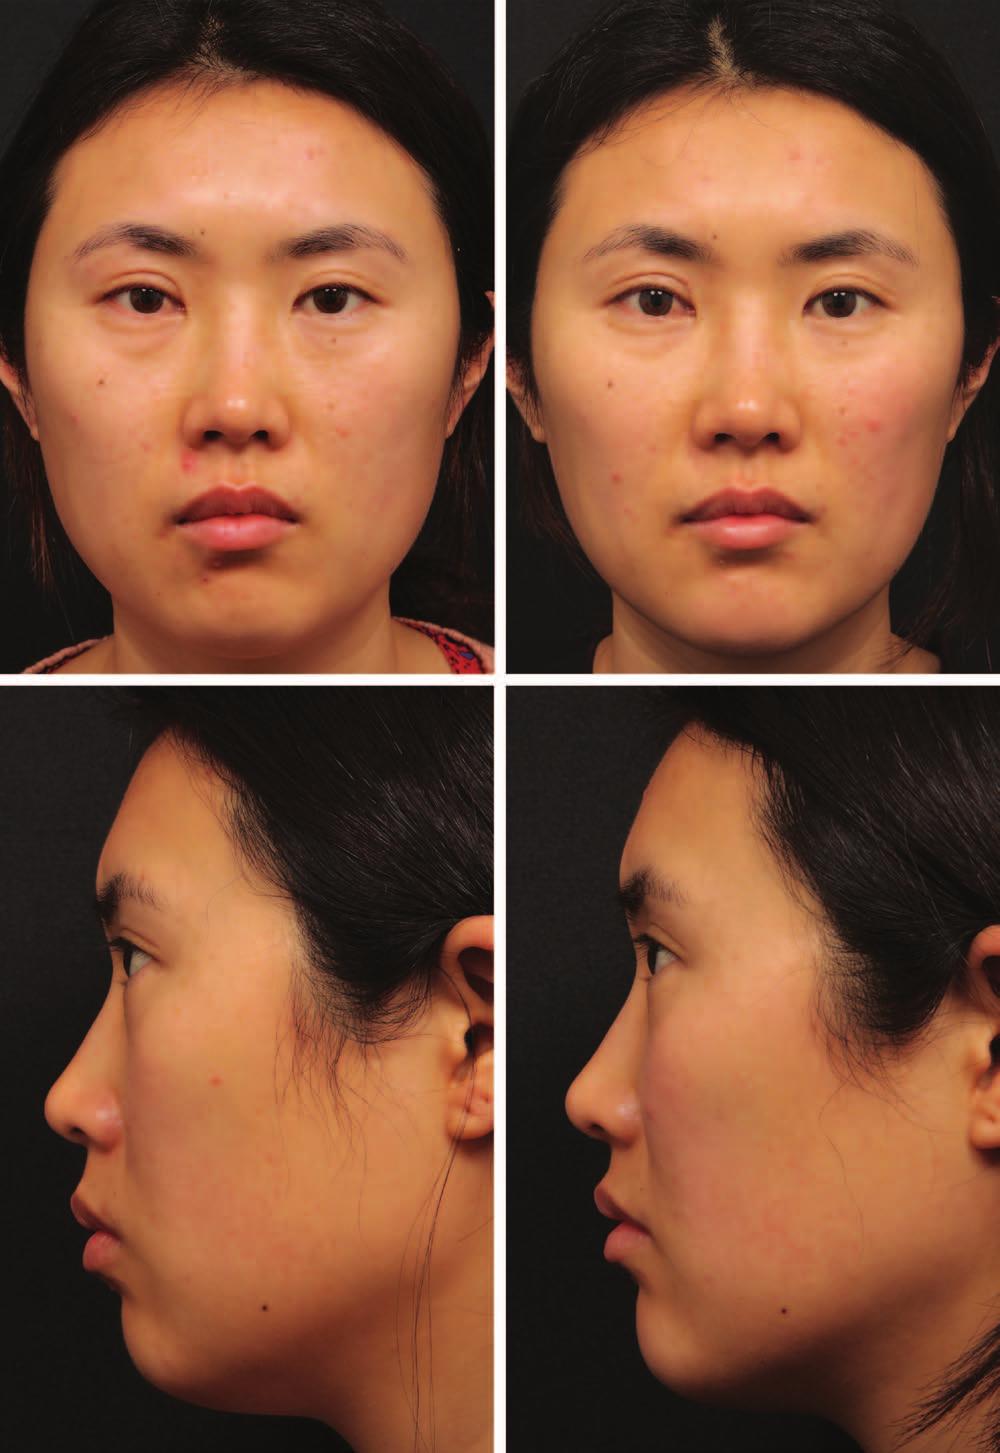 Plastic and Reconstructive Surgery November Supplement 2015 Fig. 2. (Left) A young Asian woman with wide face and flat midline facial structures secondary to the intrinsic Asian skeletal structures.